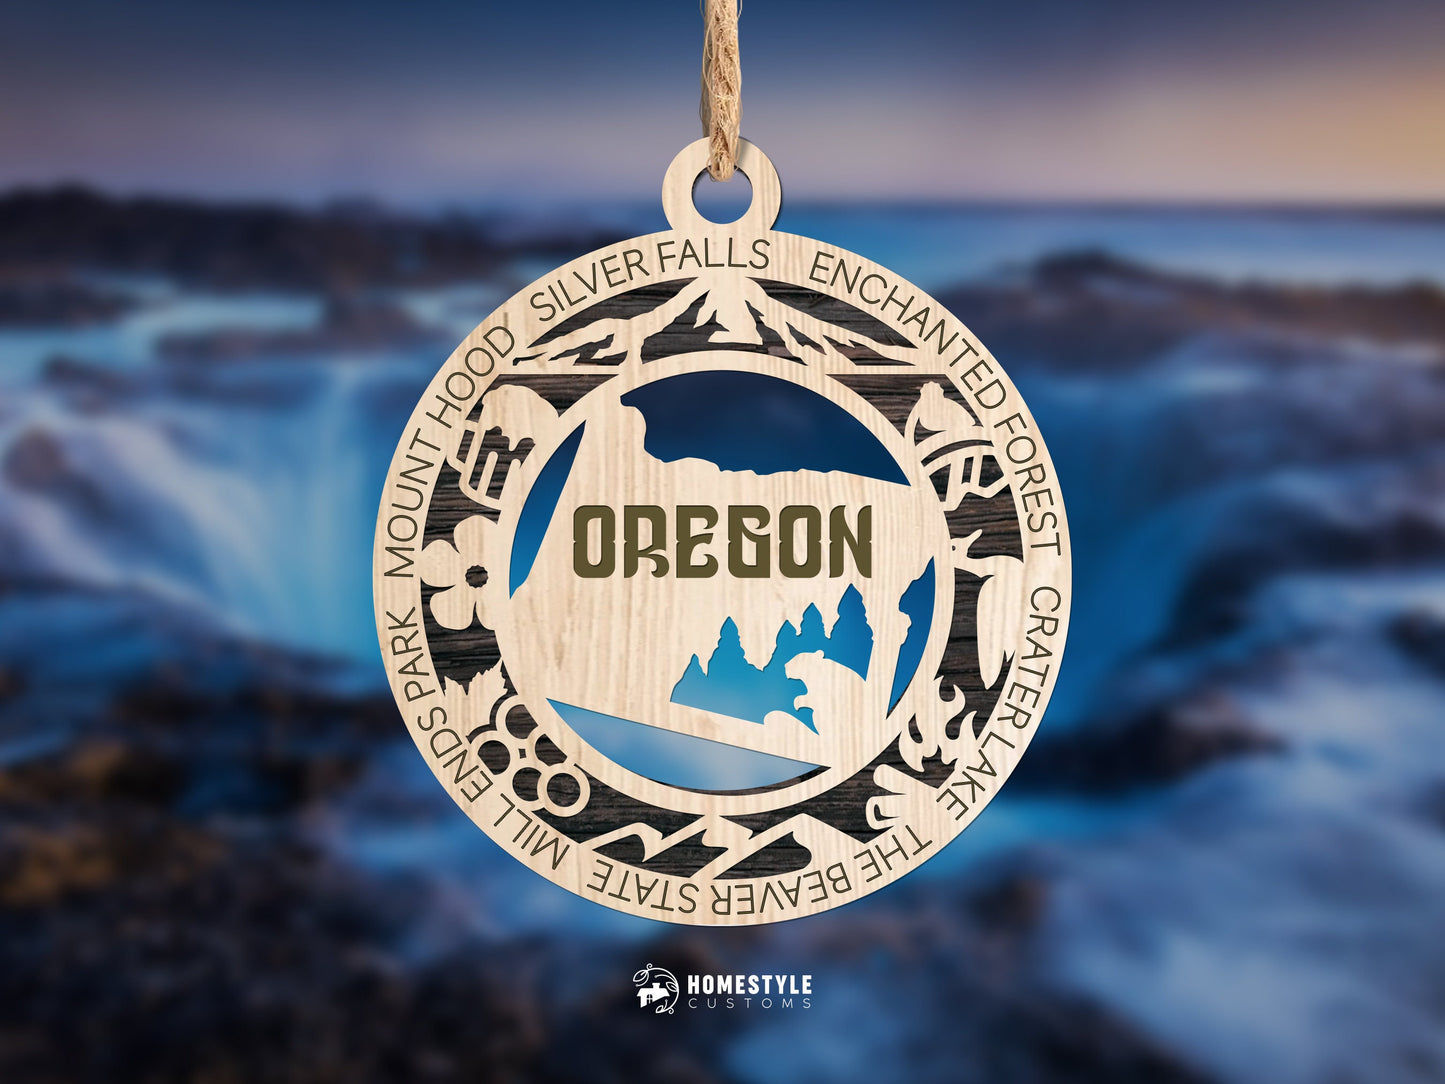 Oregon State Ornament - SVG File Download - Sized for Glowforge - Laser Ready Digital Files